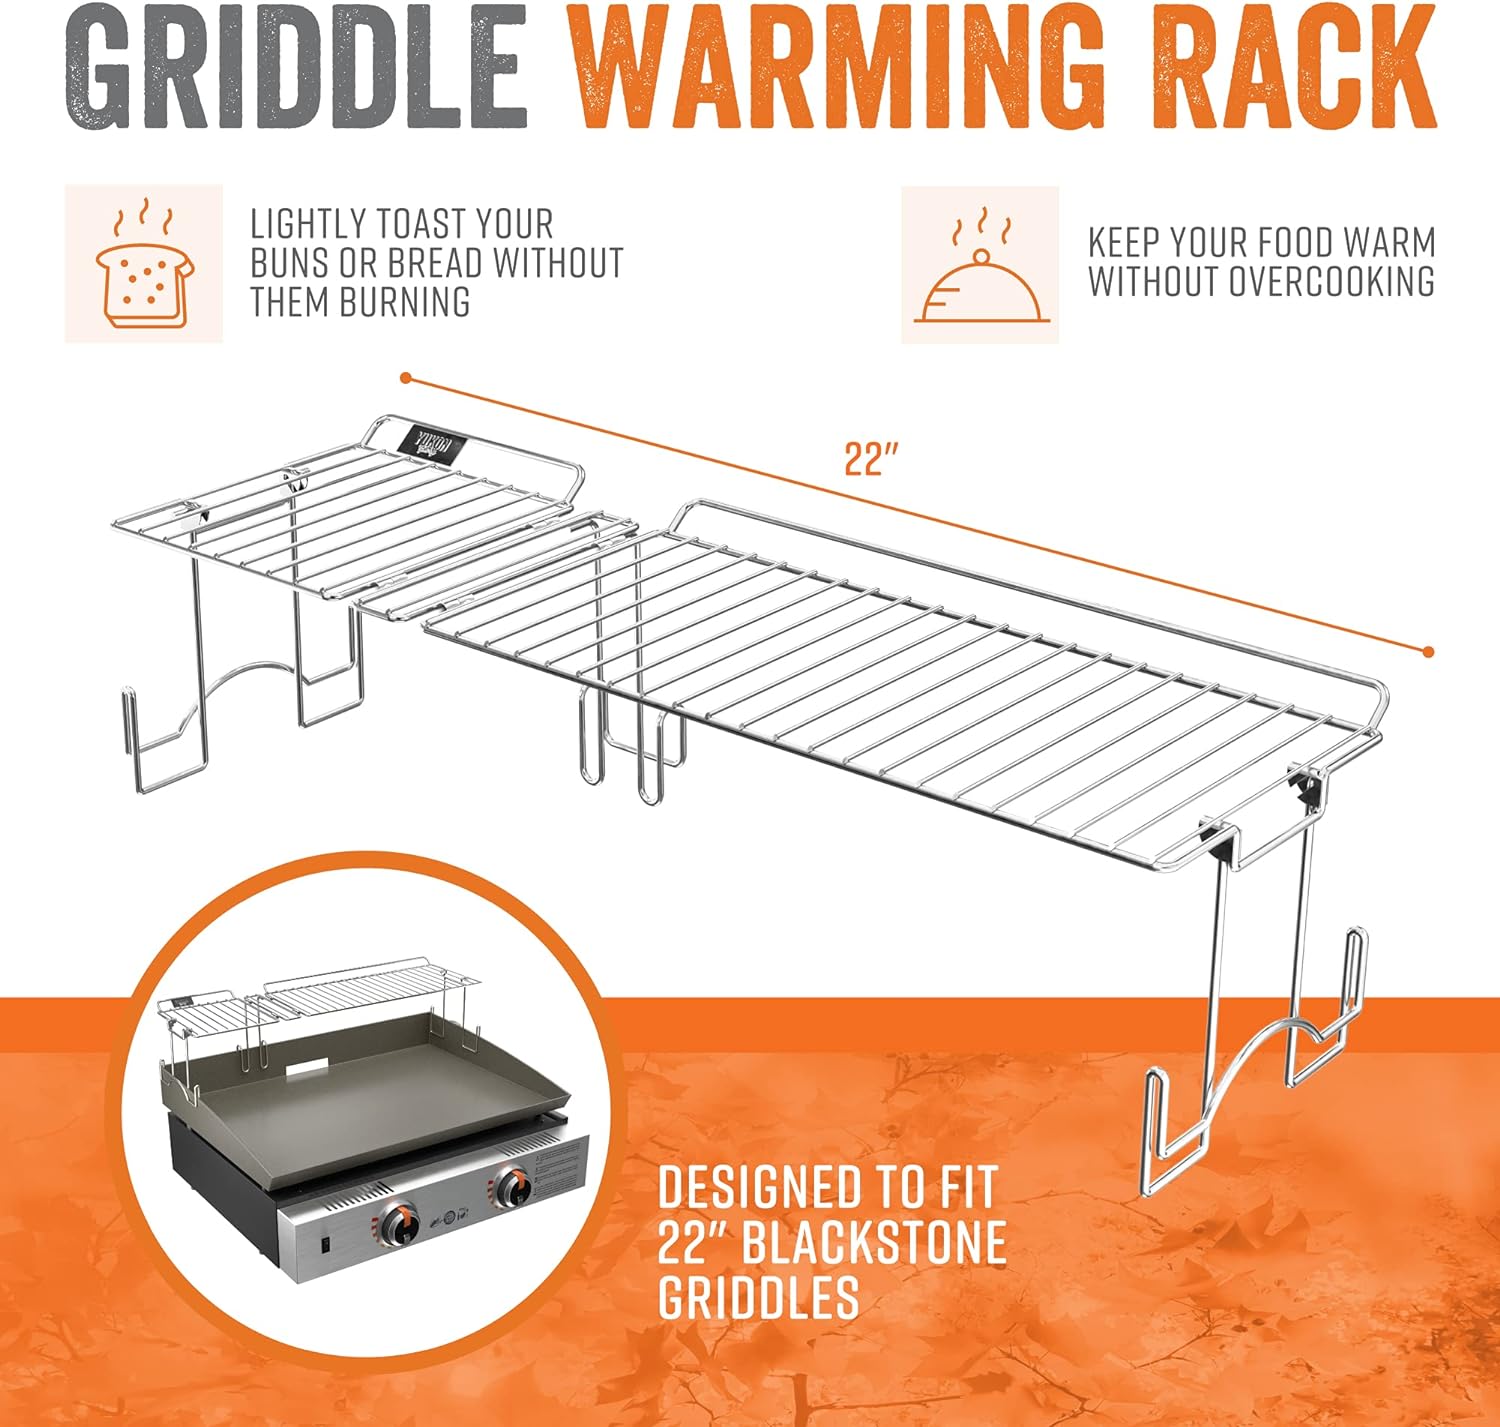 Yukon Glory Collapsible BBQ Grill Rack Griddle Warming Tray for 22